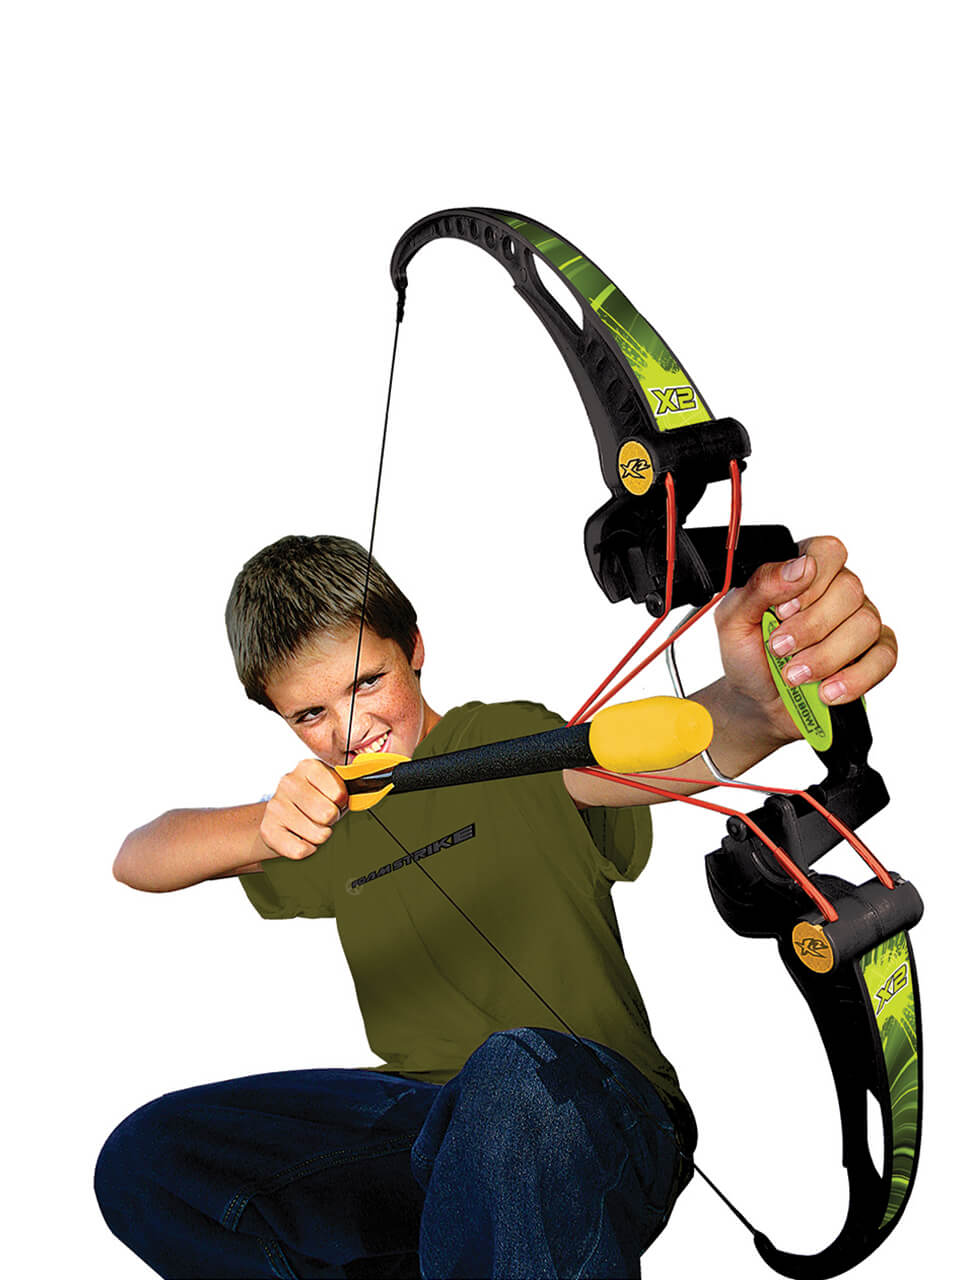 Monkey Business Sports FoamStrike Compound Bow X2 Version 2.0 Replacement AR for sale online 